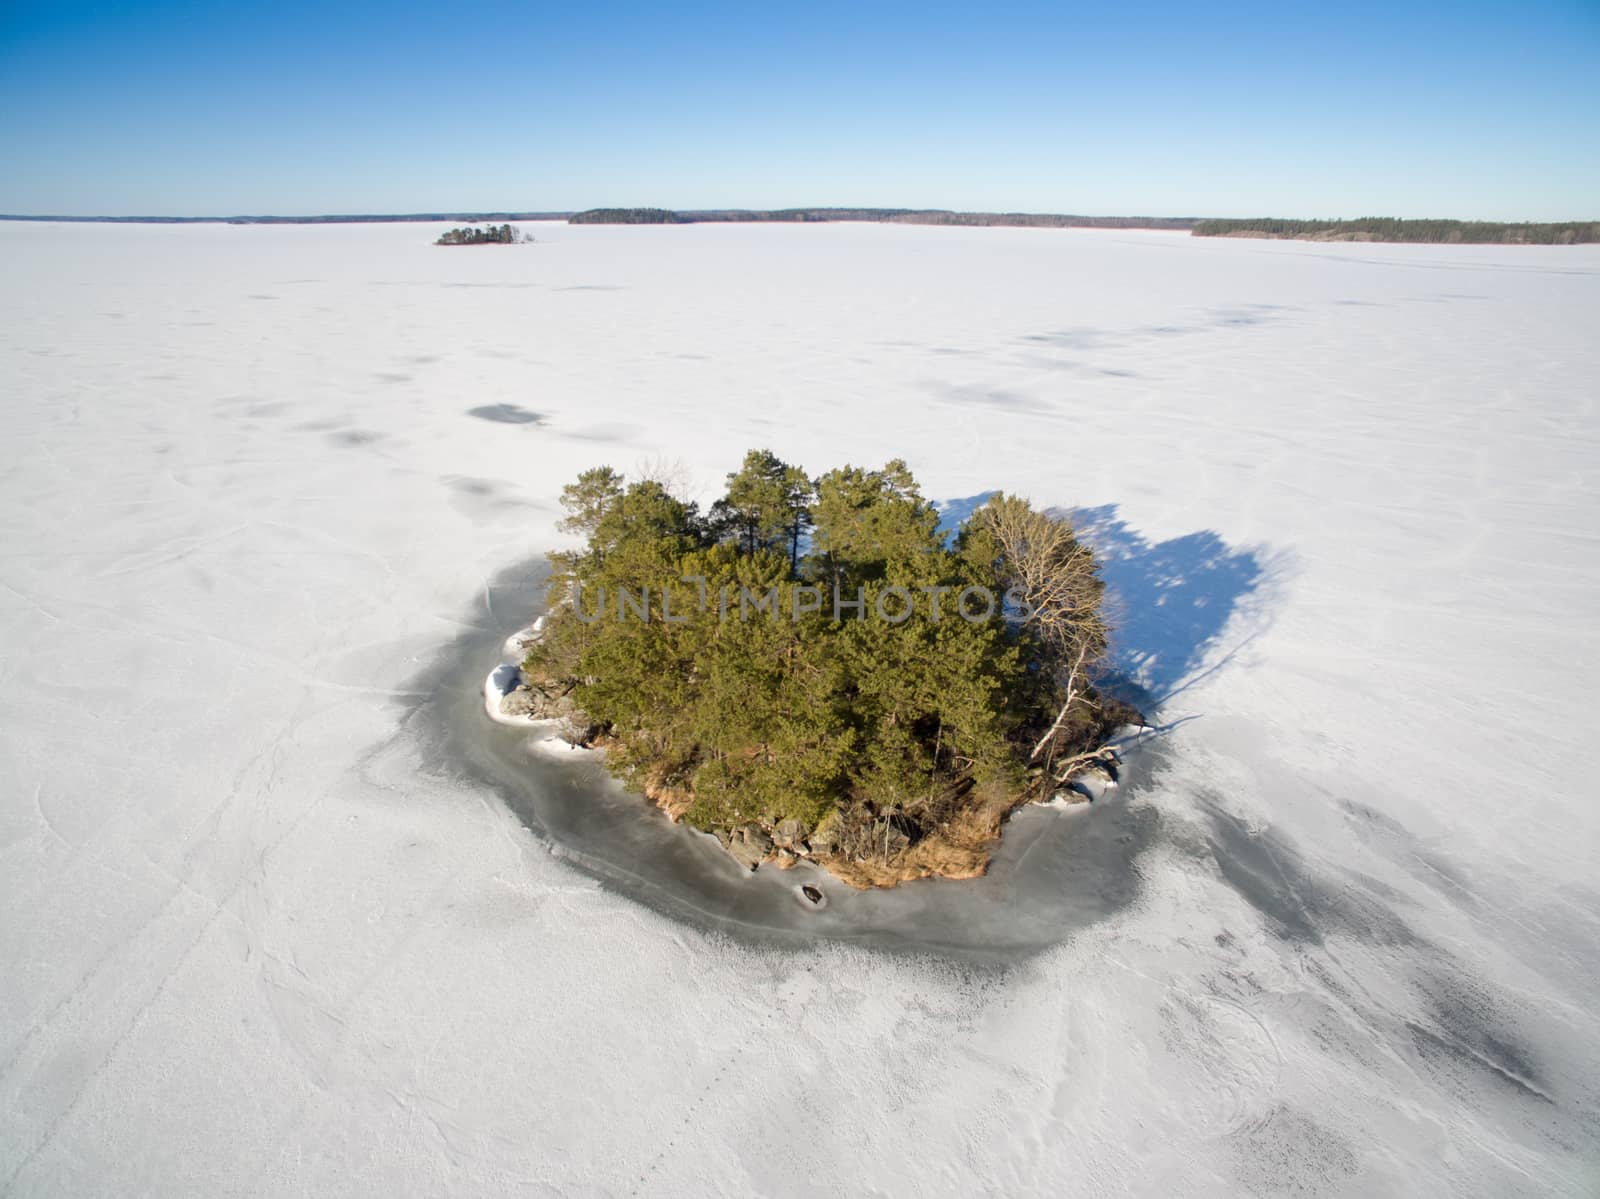 Island surronded by ice on a frozen lake